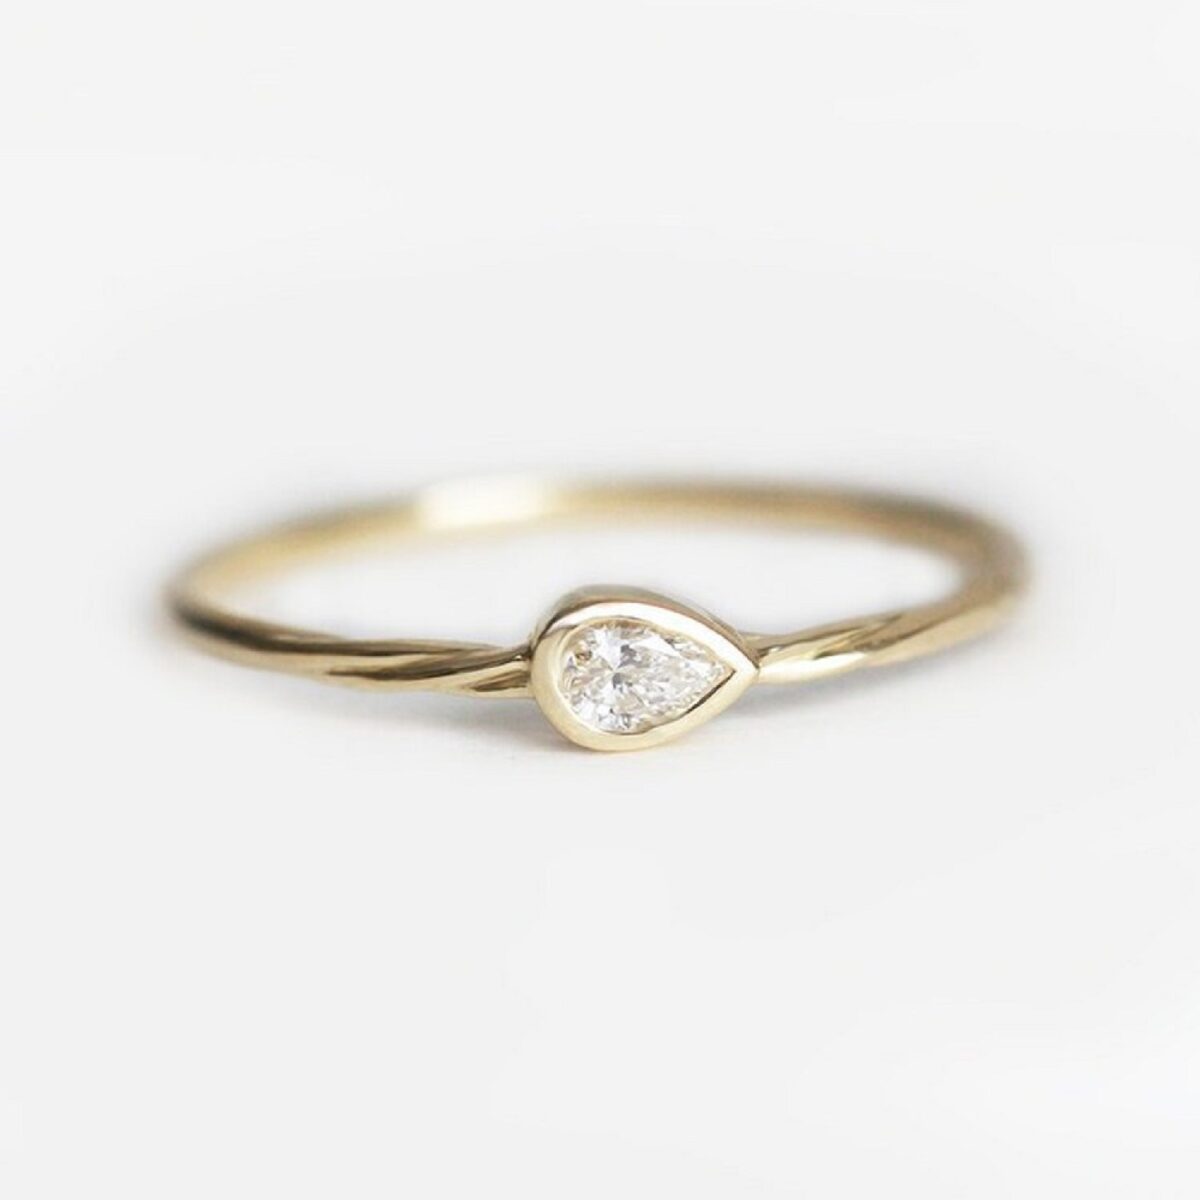 Minimal vintage style bezel set 3*2 mm pear cut lab grown diamond solitaire ring crafted in 14k yellow gold.